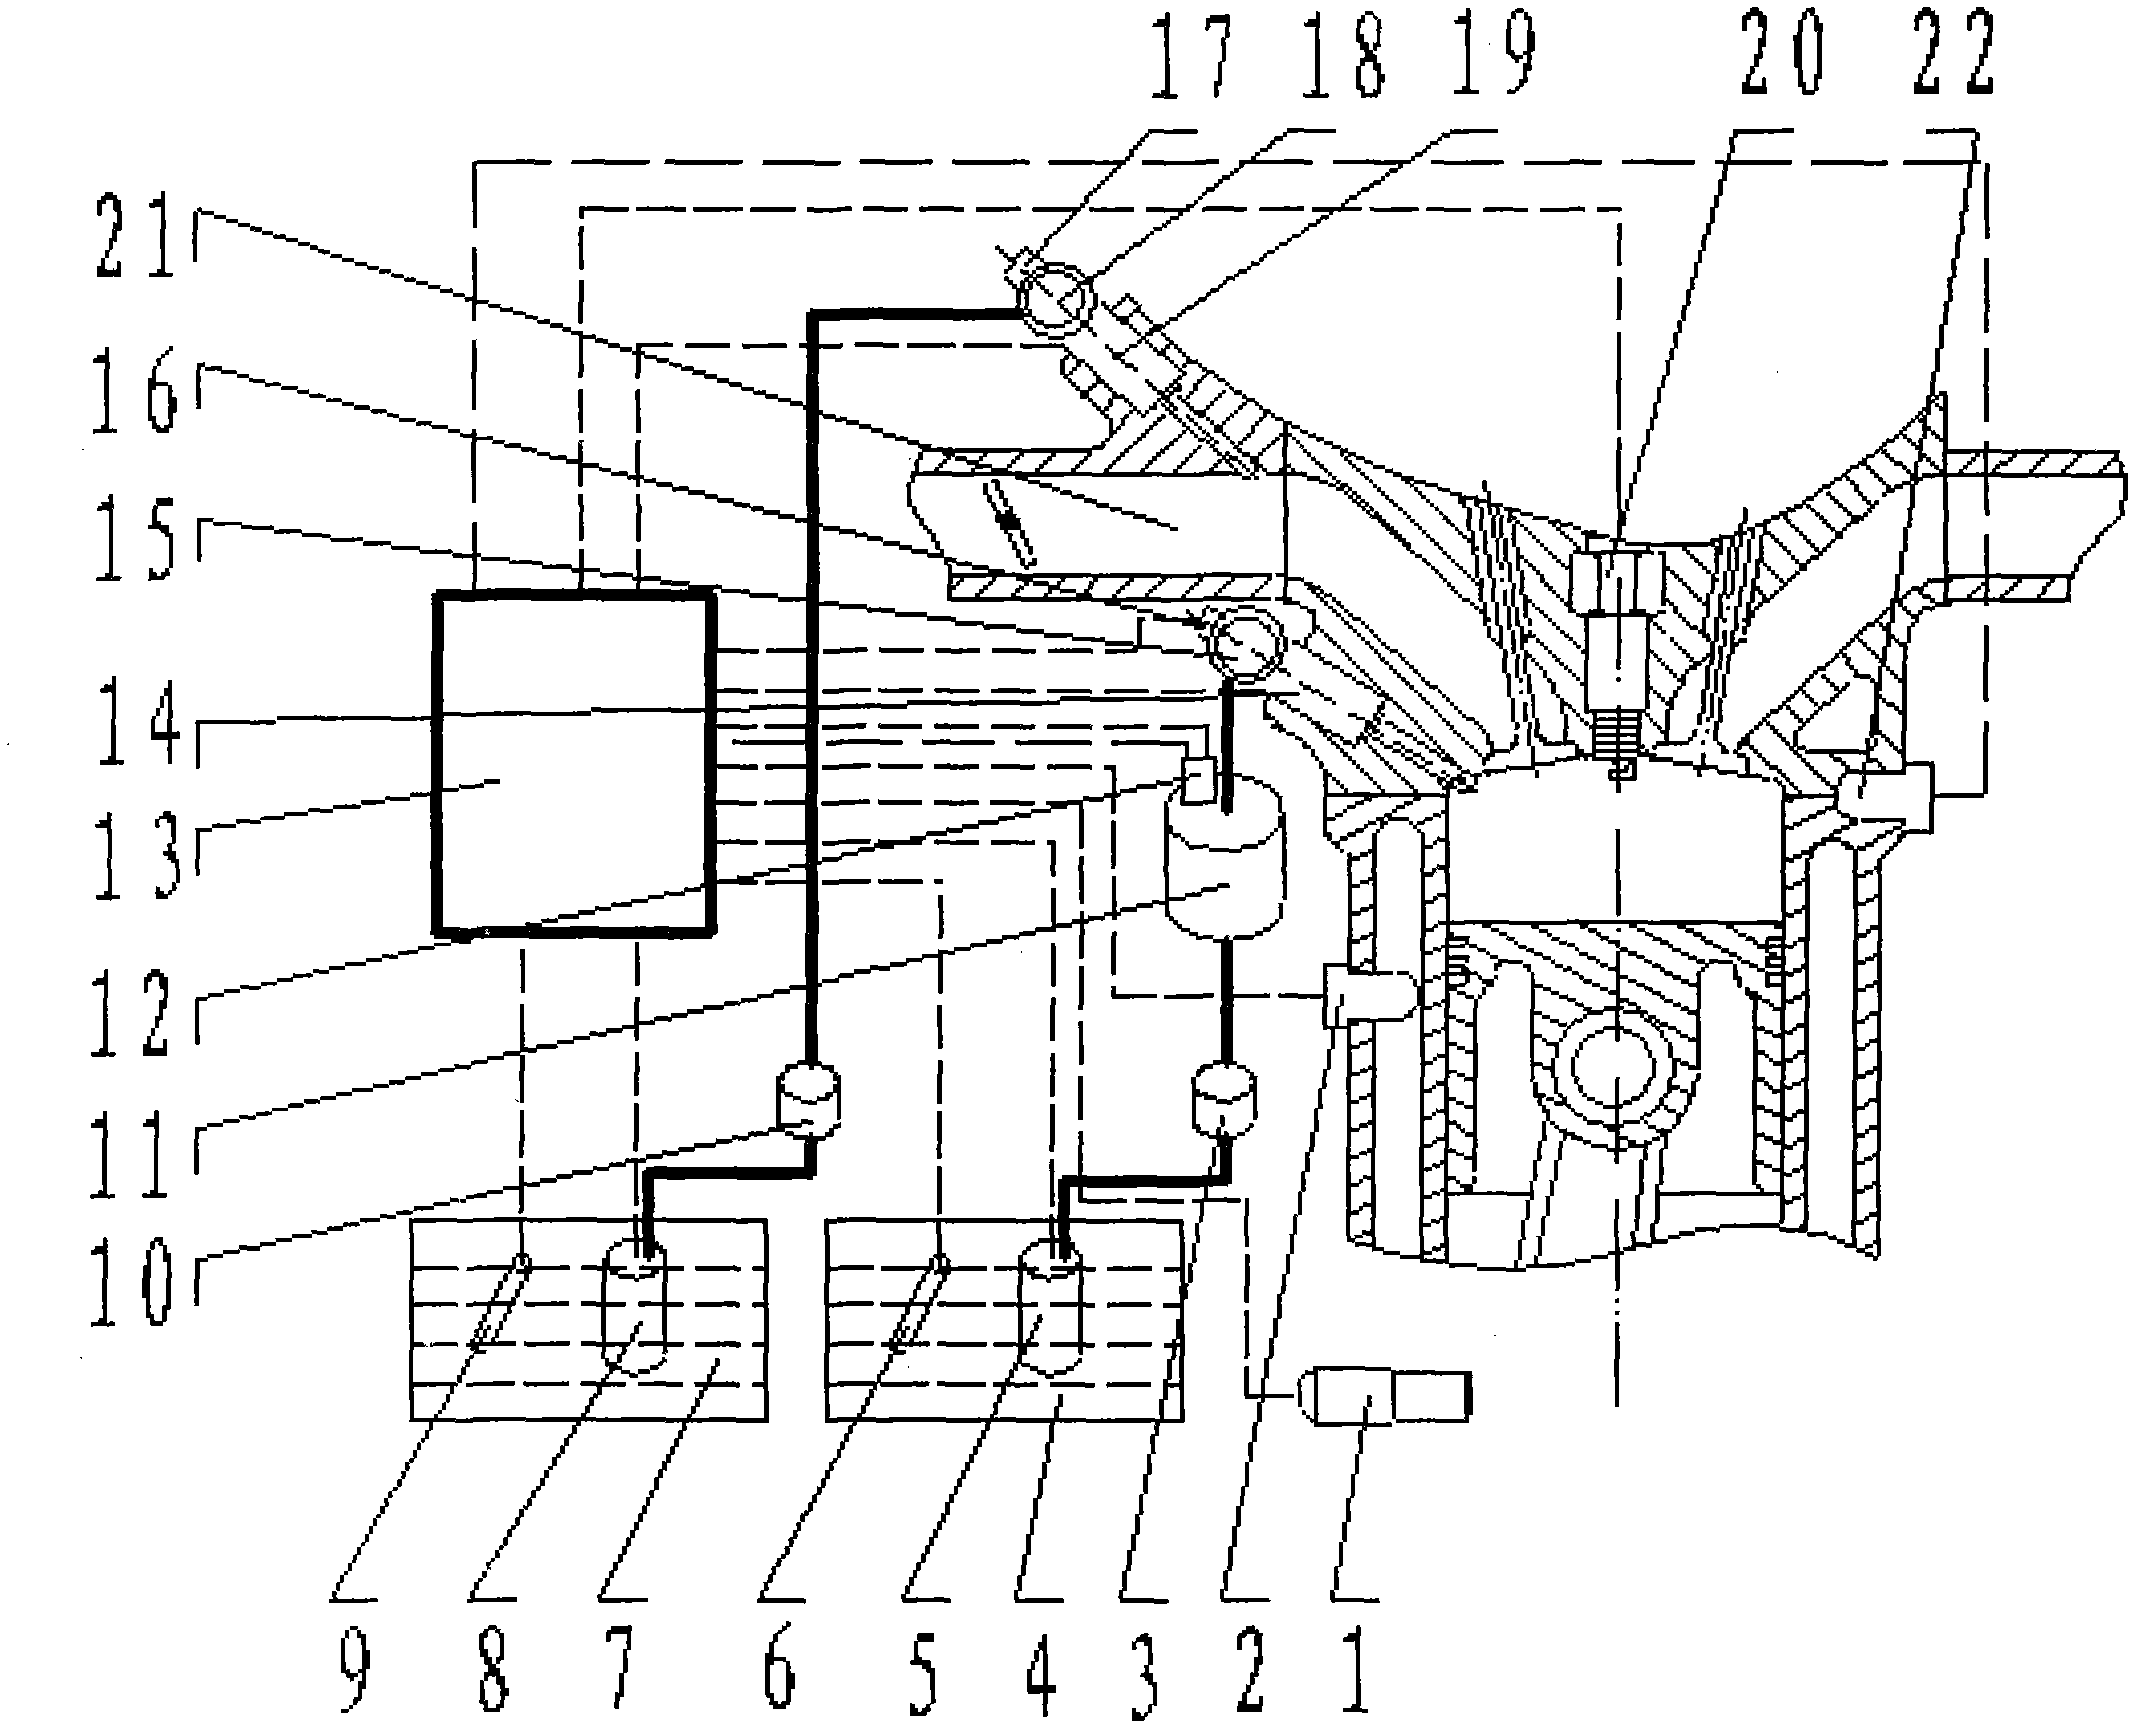 Fuel injection control system of flexible fuel engine